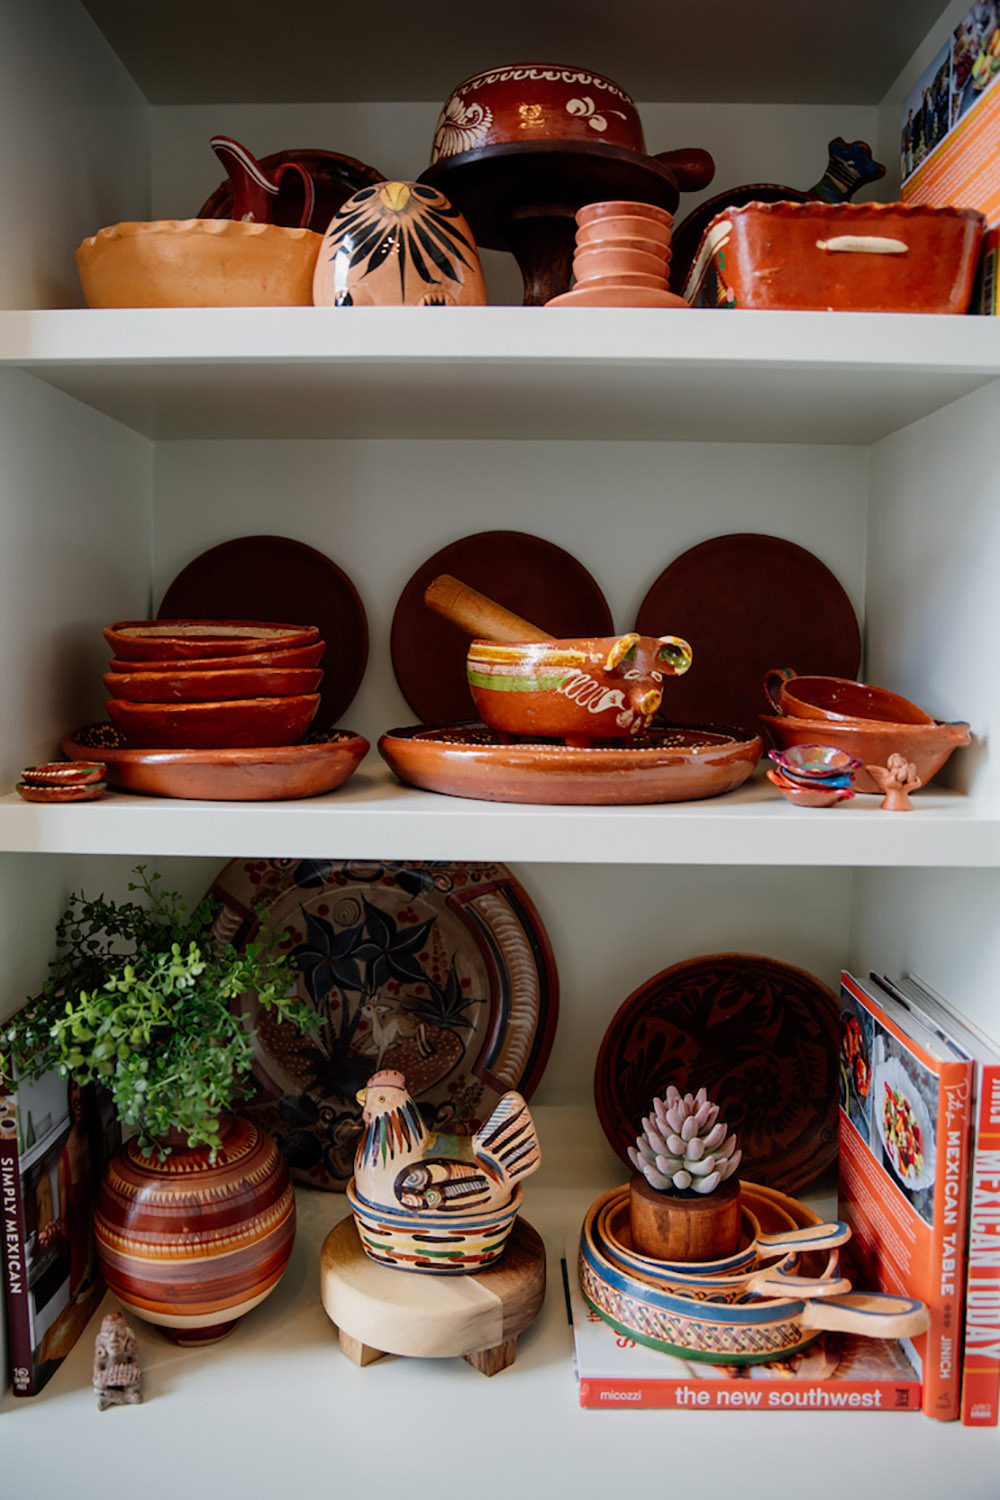 Several bookshelves decorated with Mexican pottery.